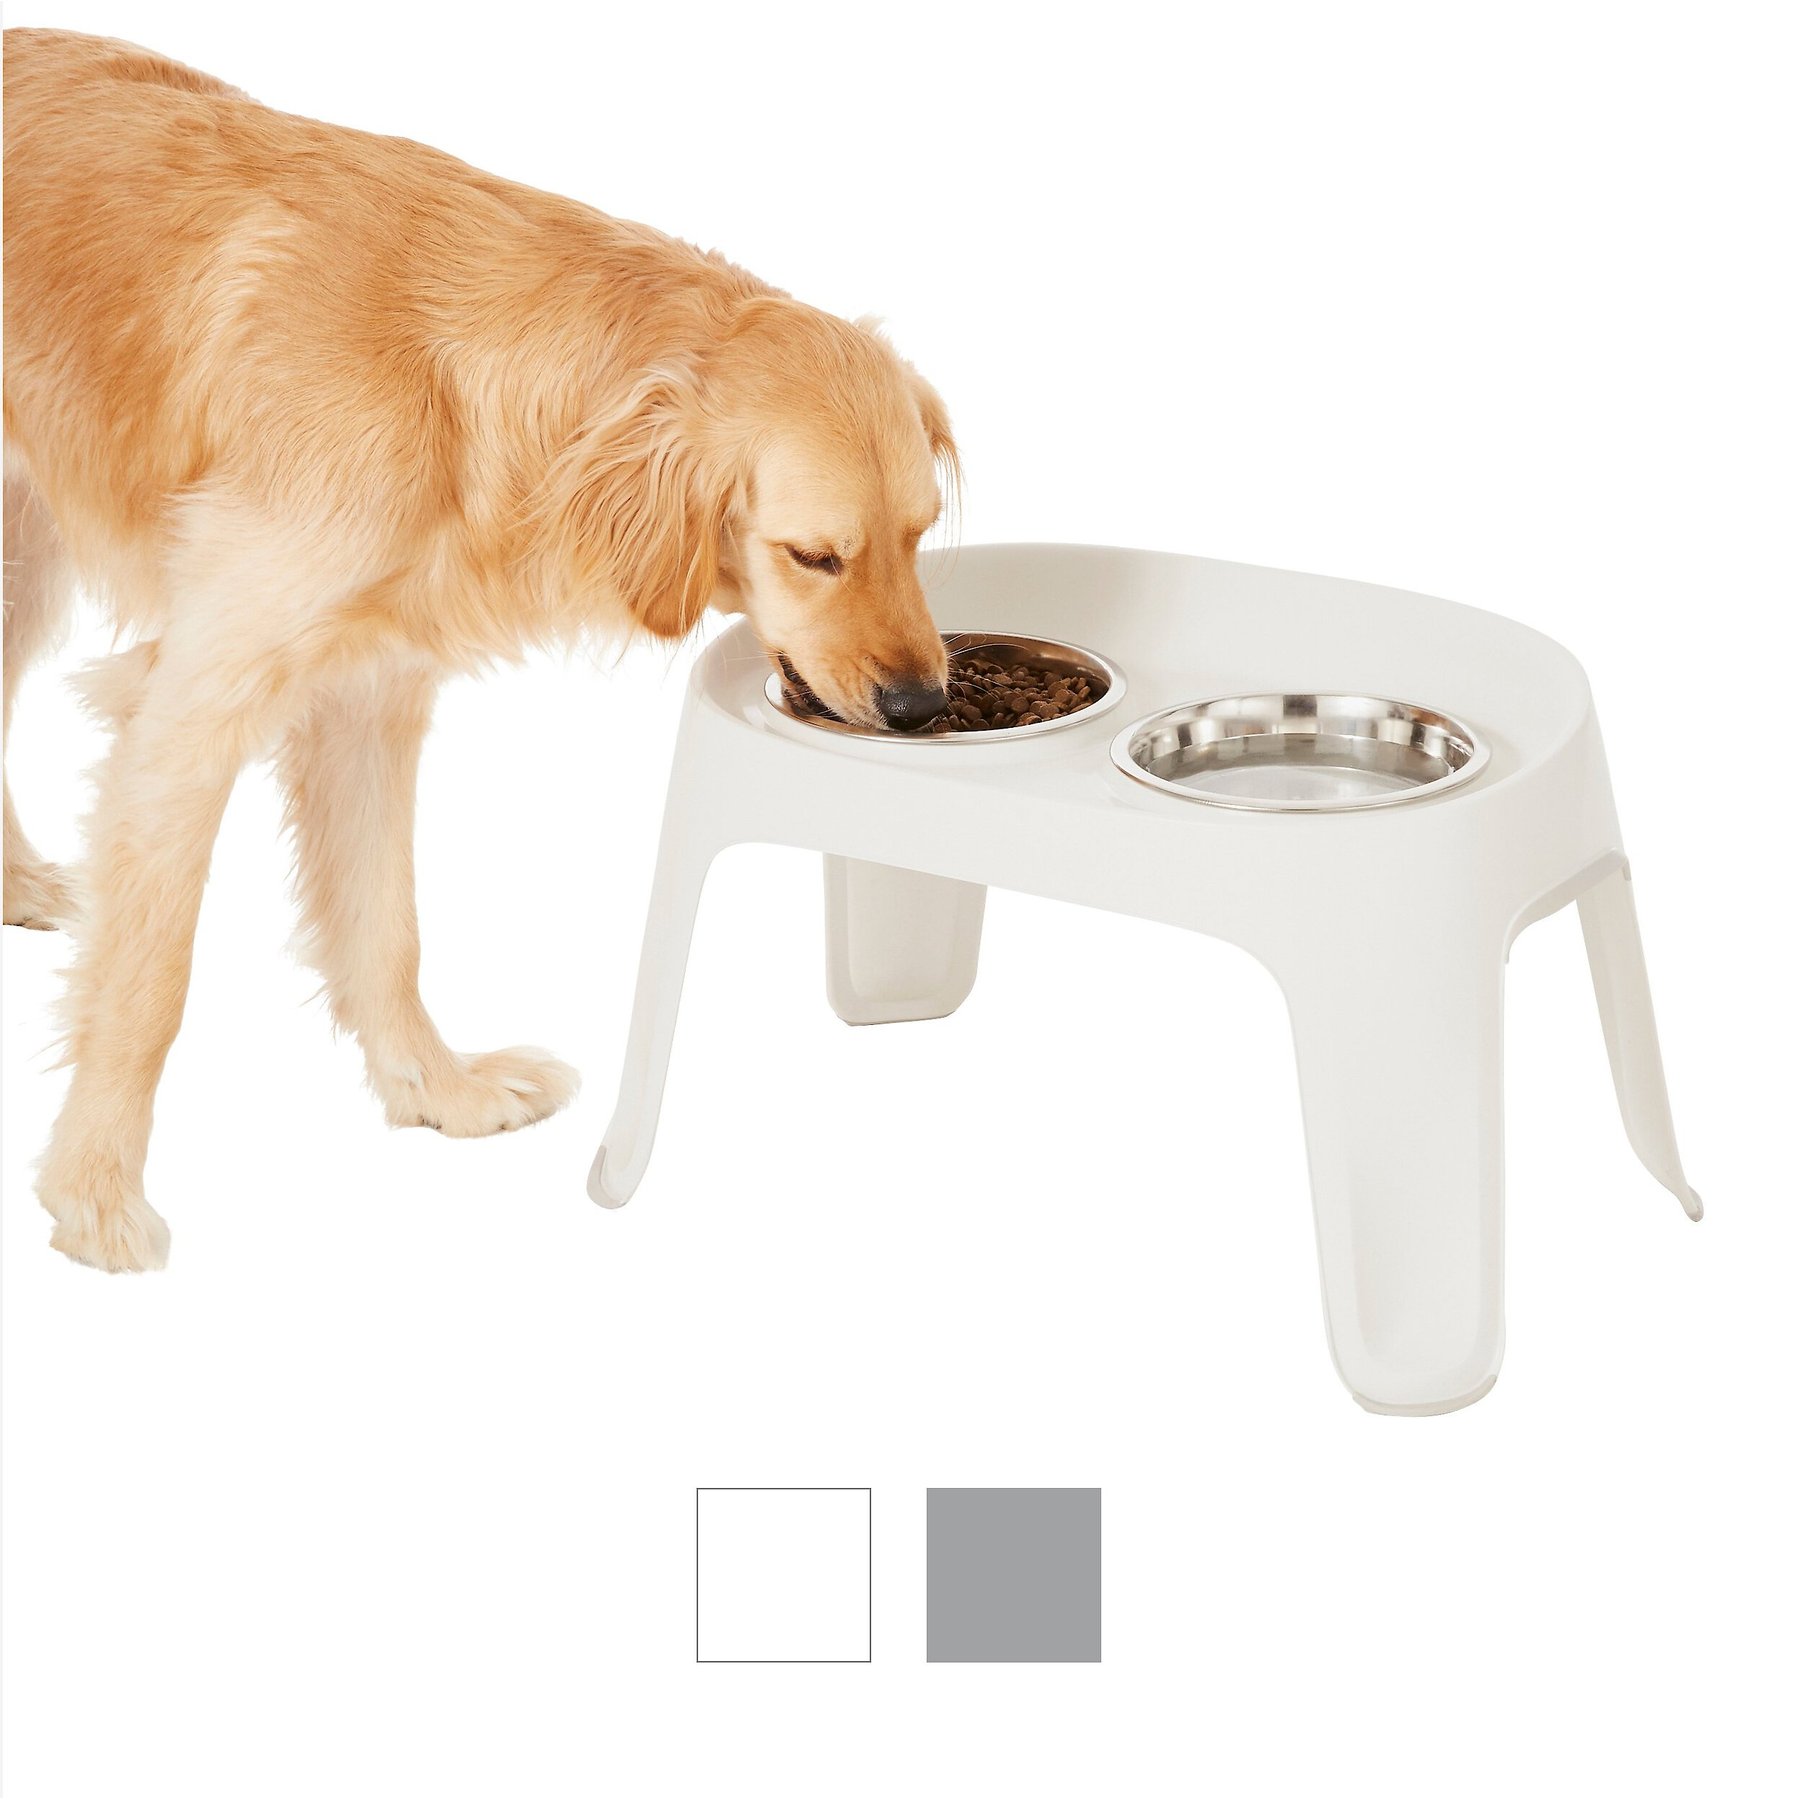 Pawfect Pets Elevated Dog Bowl Stand - 7 Raised Pet Feeder for Medium Dogs  with Four Stainless Steel Bowls, Modern Dog Bowl, Modern Dog Bowl Stand